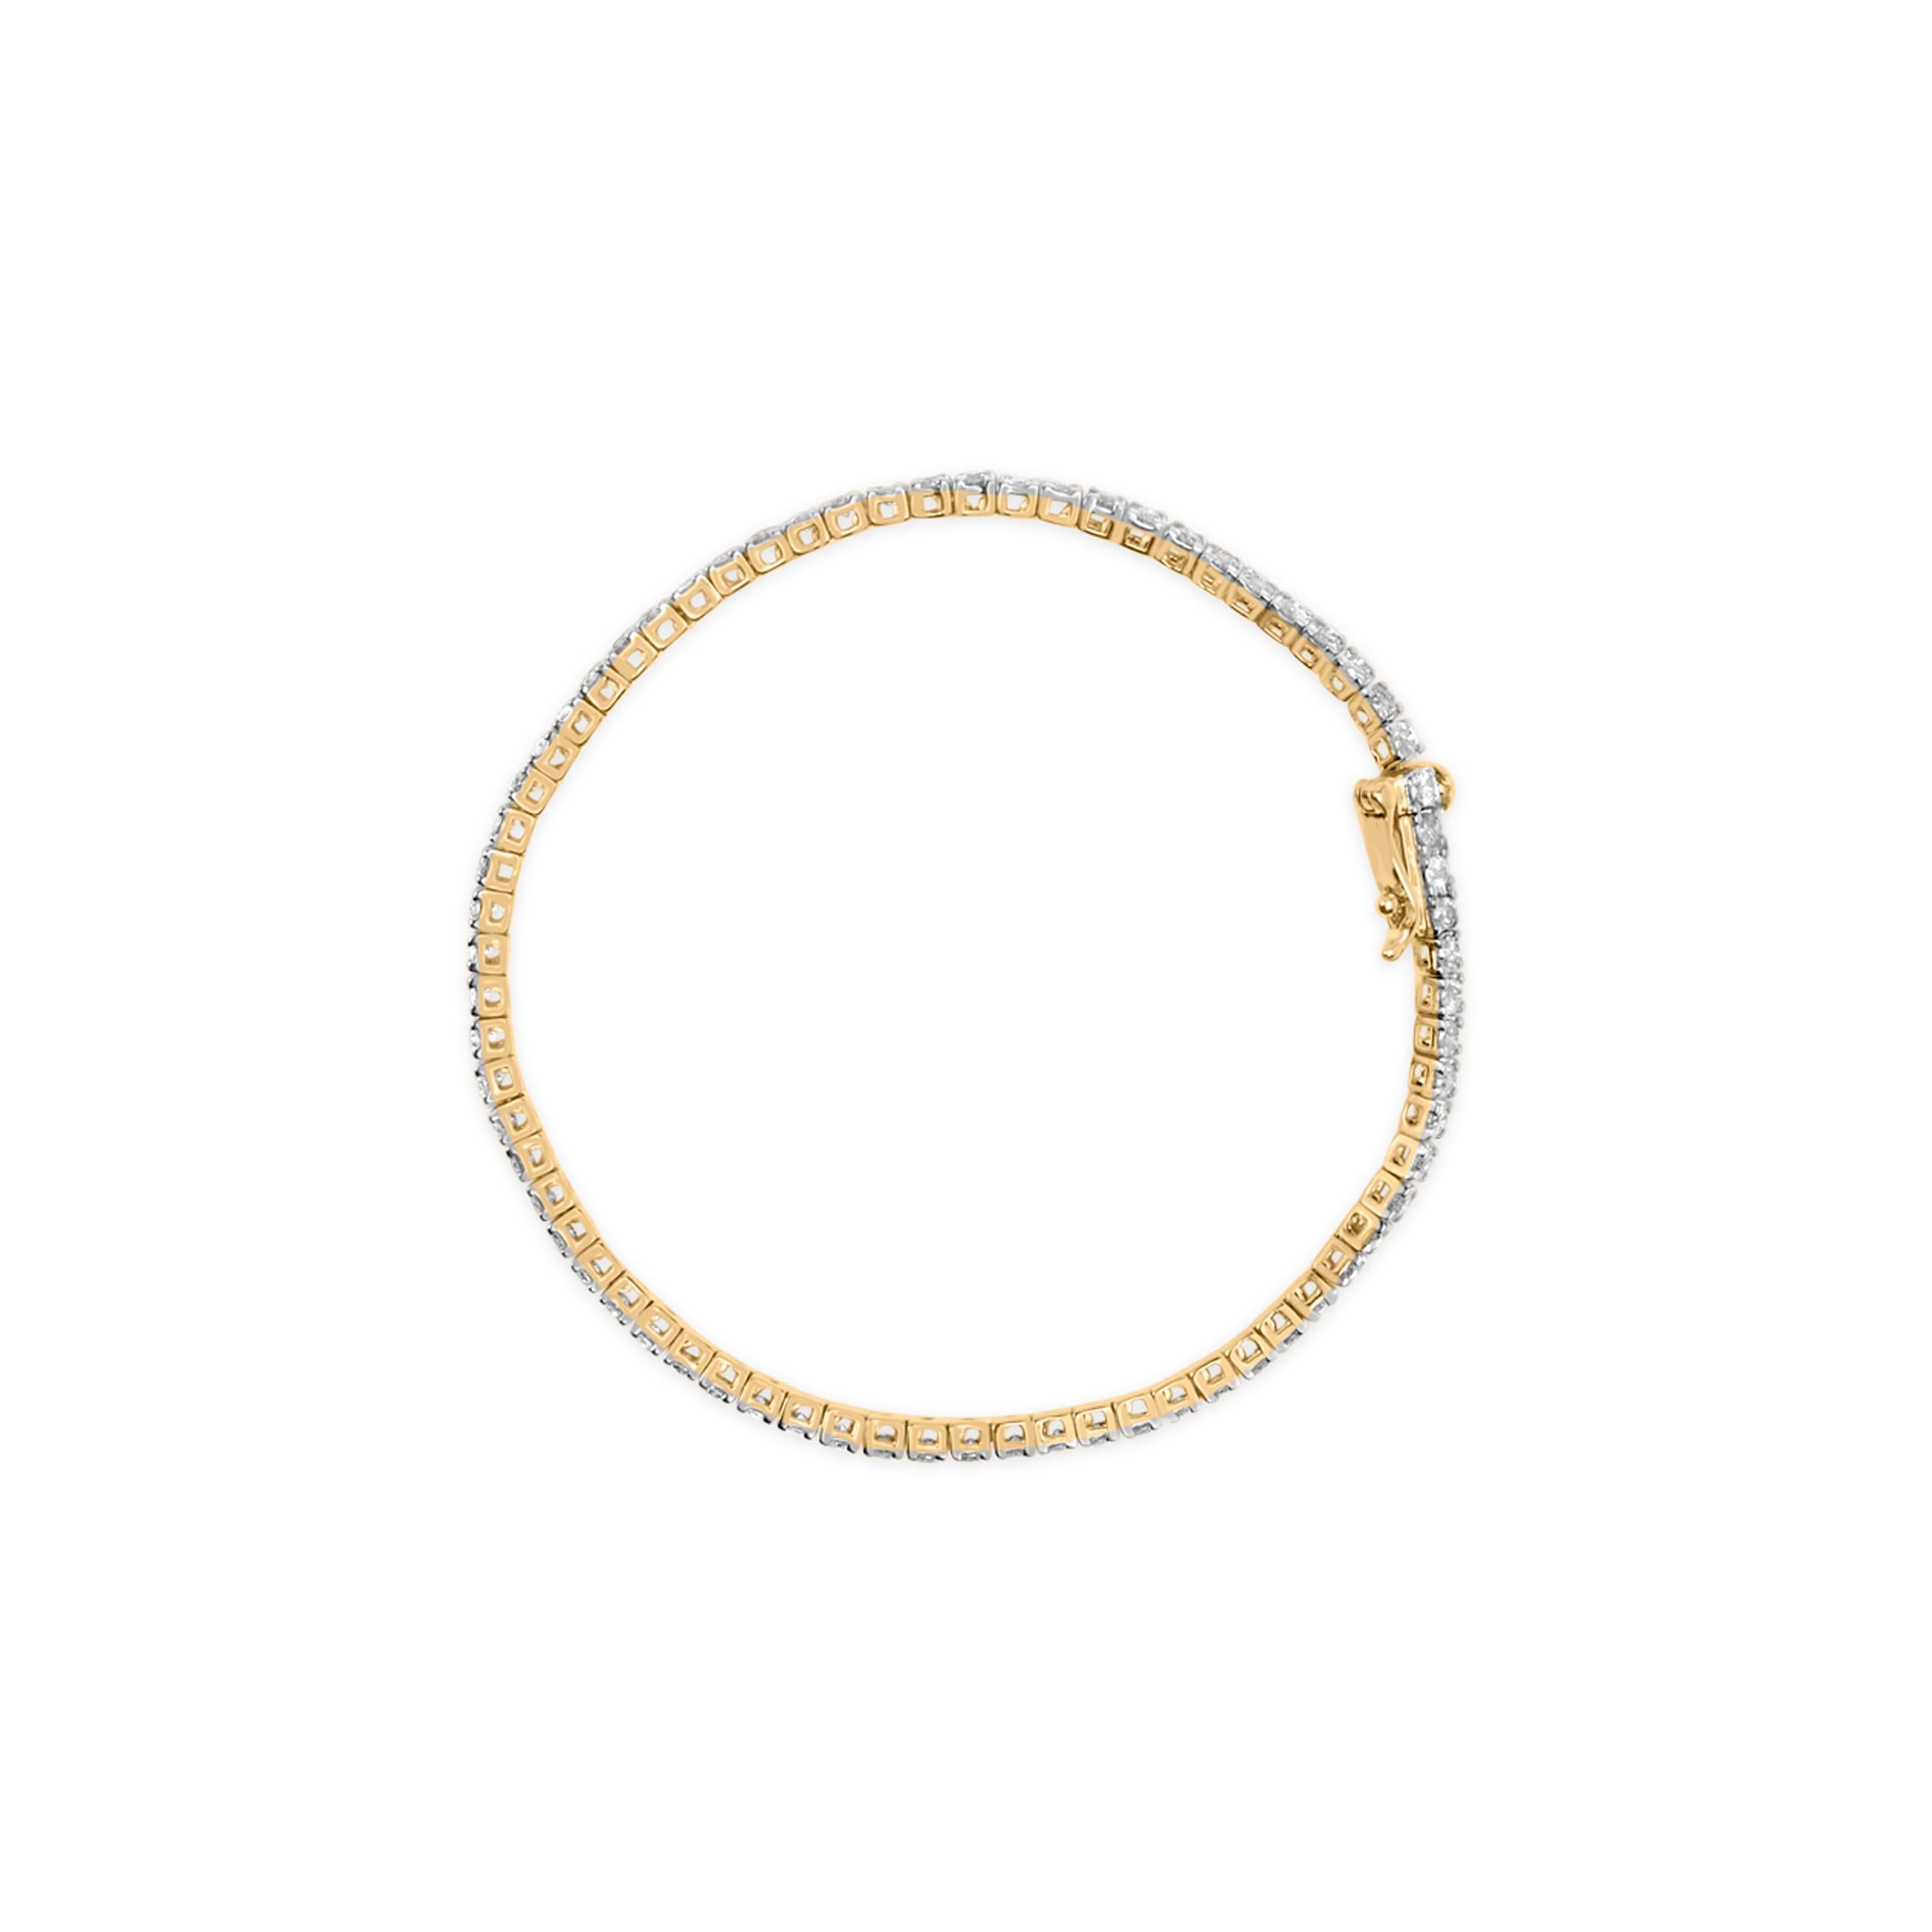 Modern 14K Yellow Gold Plated .925 Sterling Silver 3.0 Cttw Diamond Tennis Bracelet For Sale